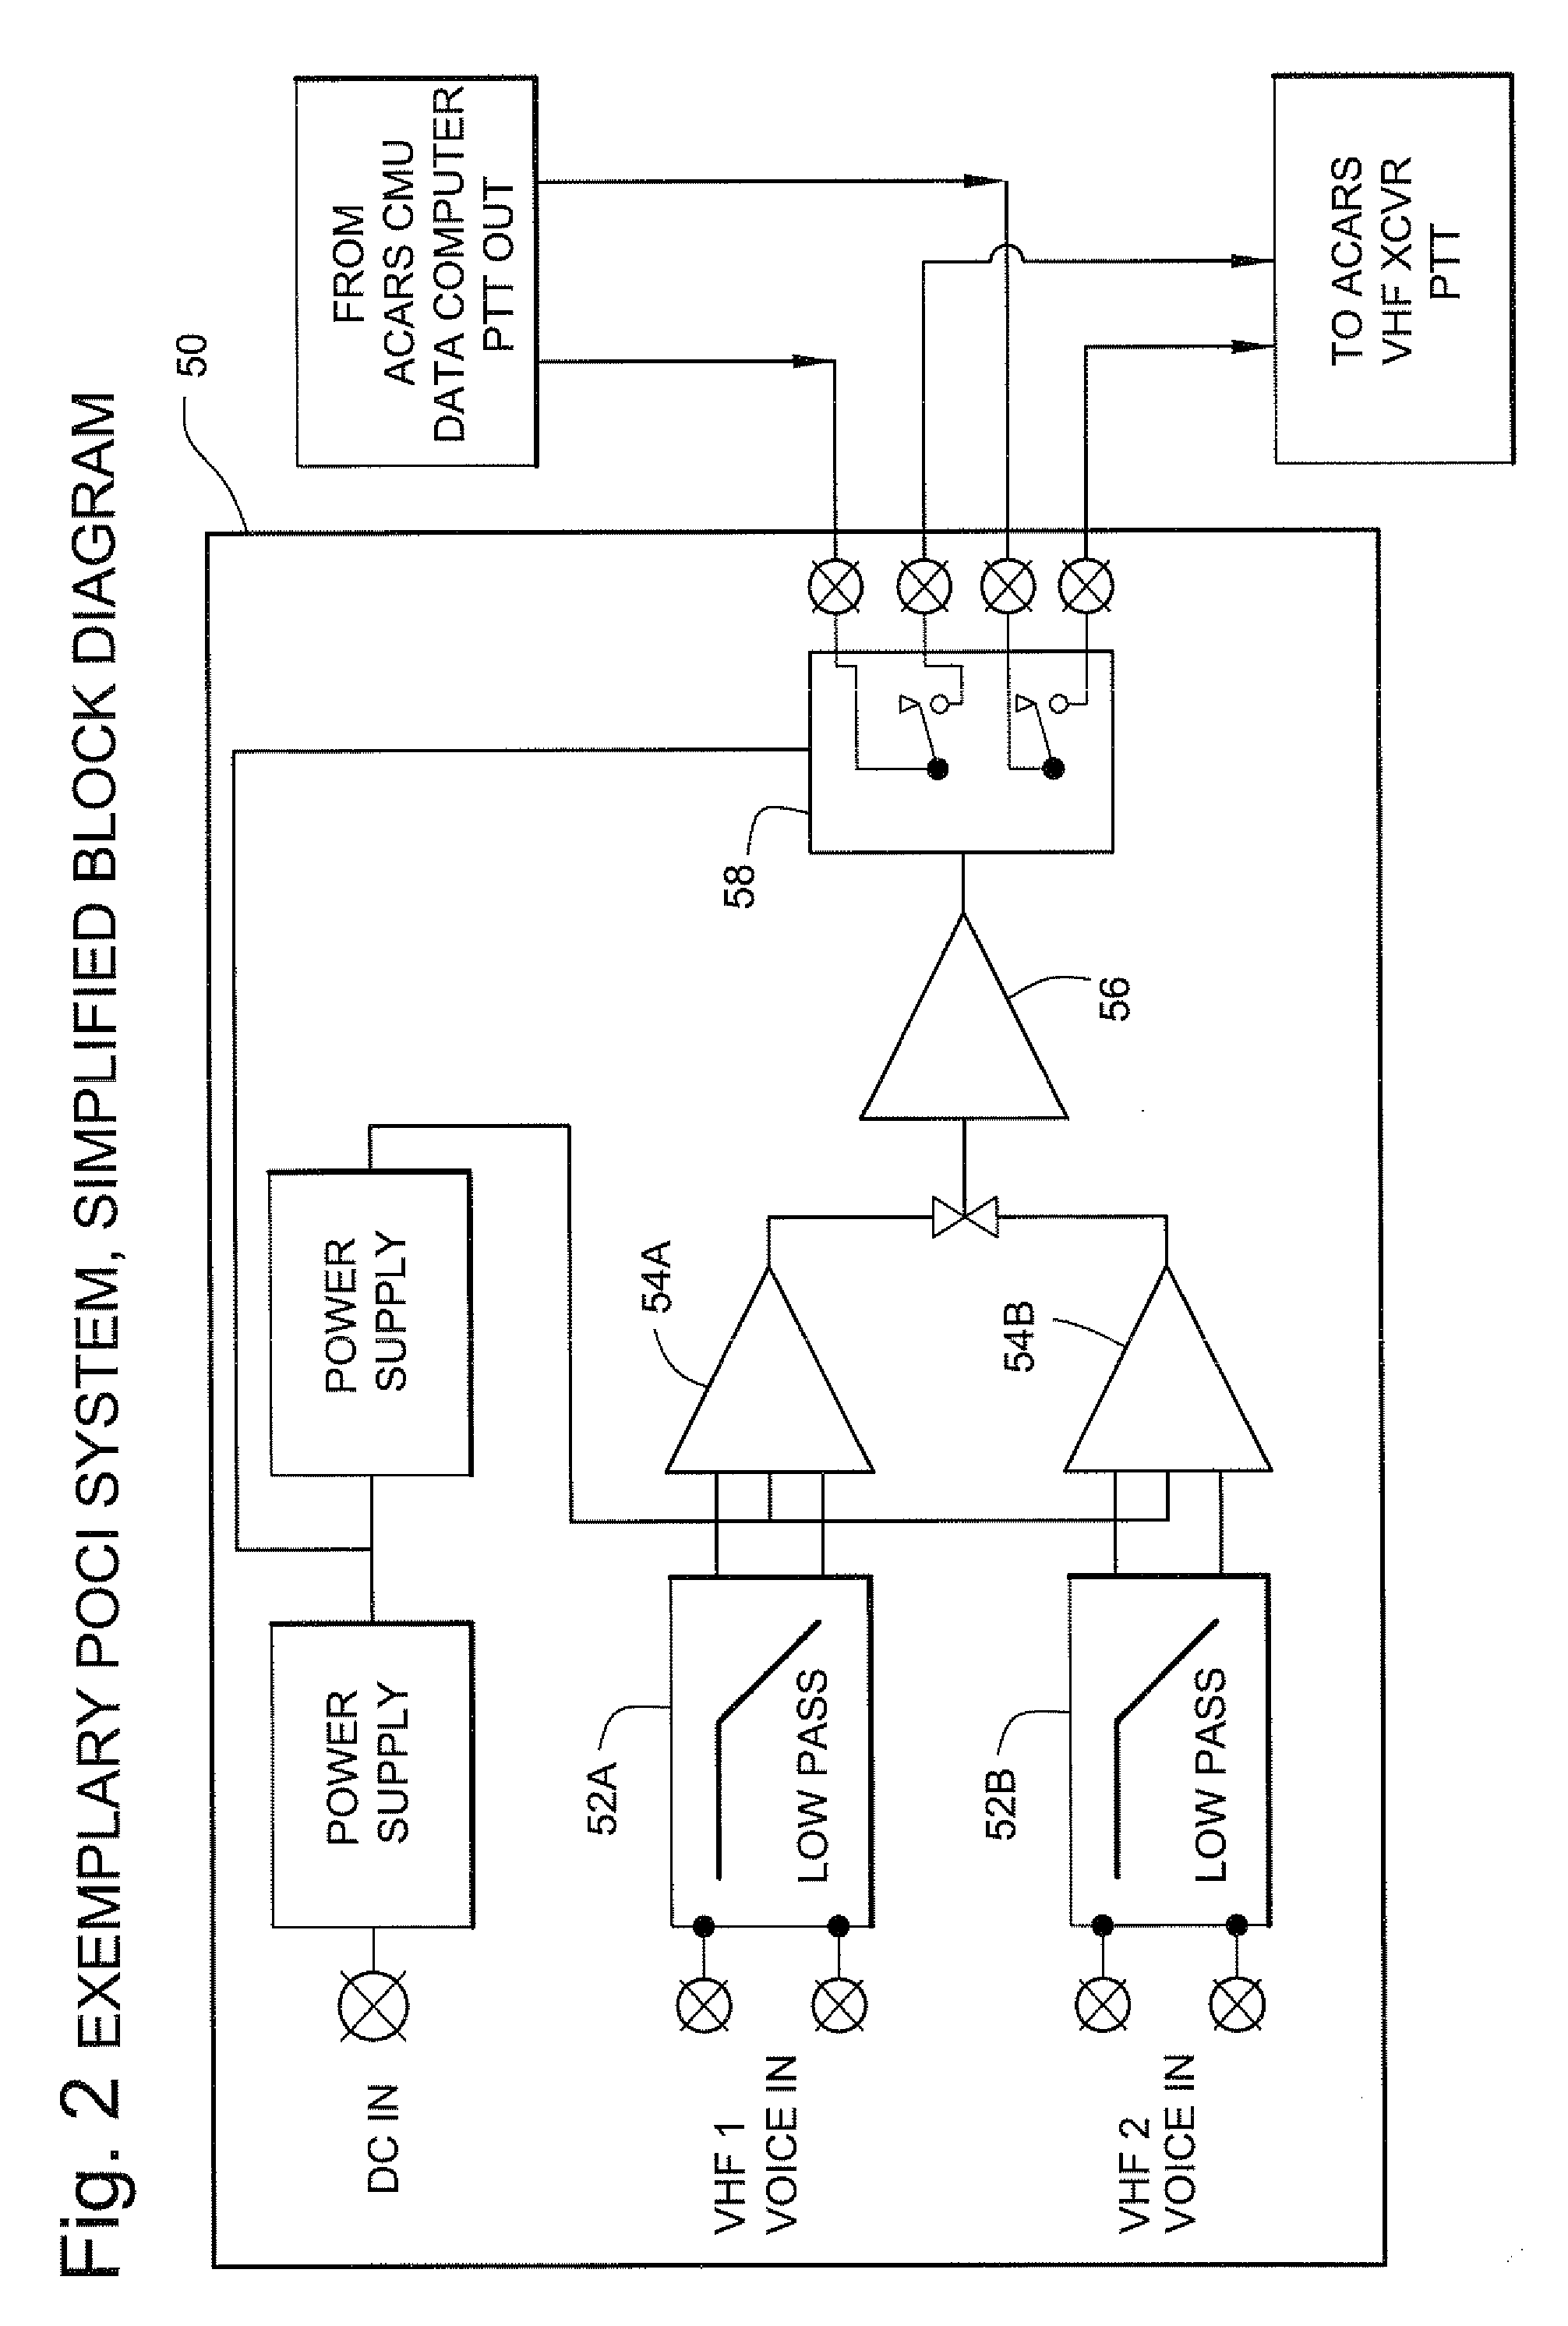 Presence of communication interlock method and apparatus for reducing or eliminating aircraft communications radio interference